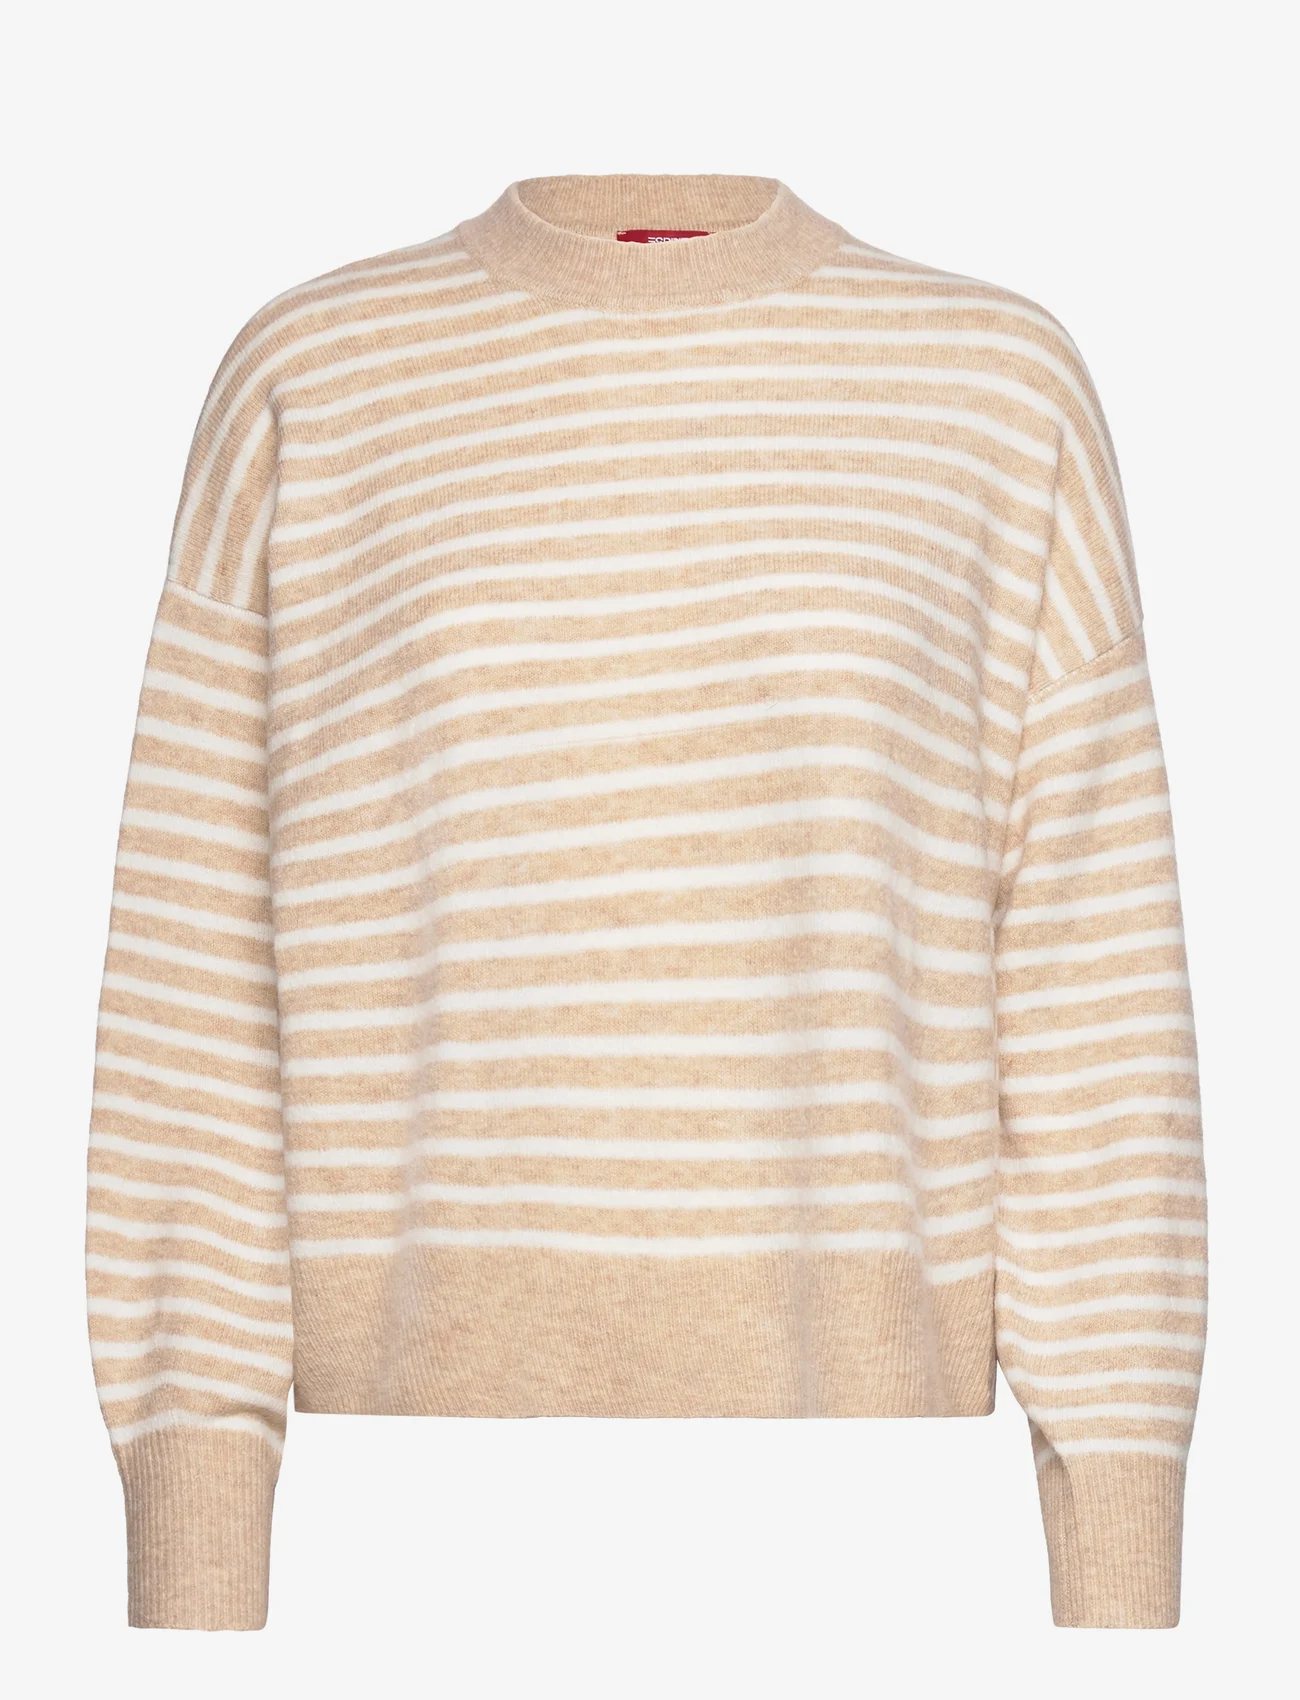 Esprit Casual - Women Sweaters long sleeve - pullover - sand 2 - 0